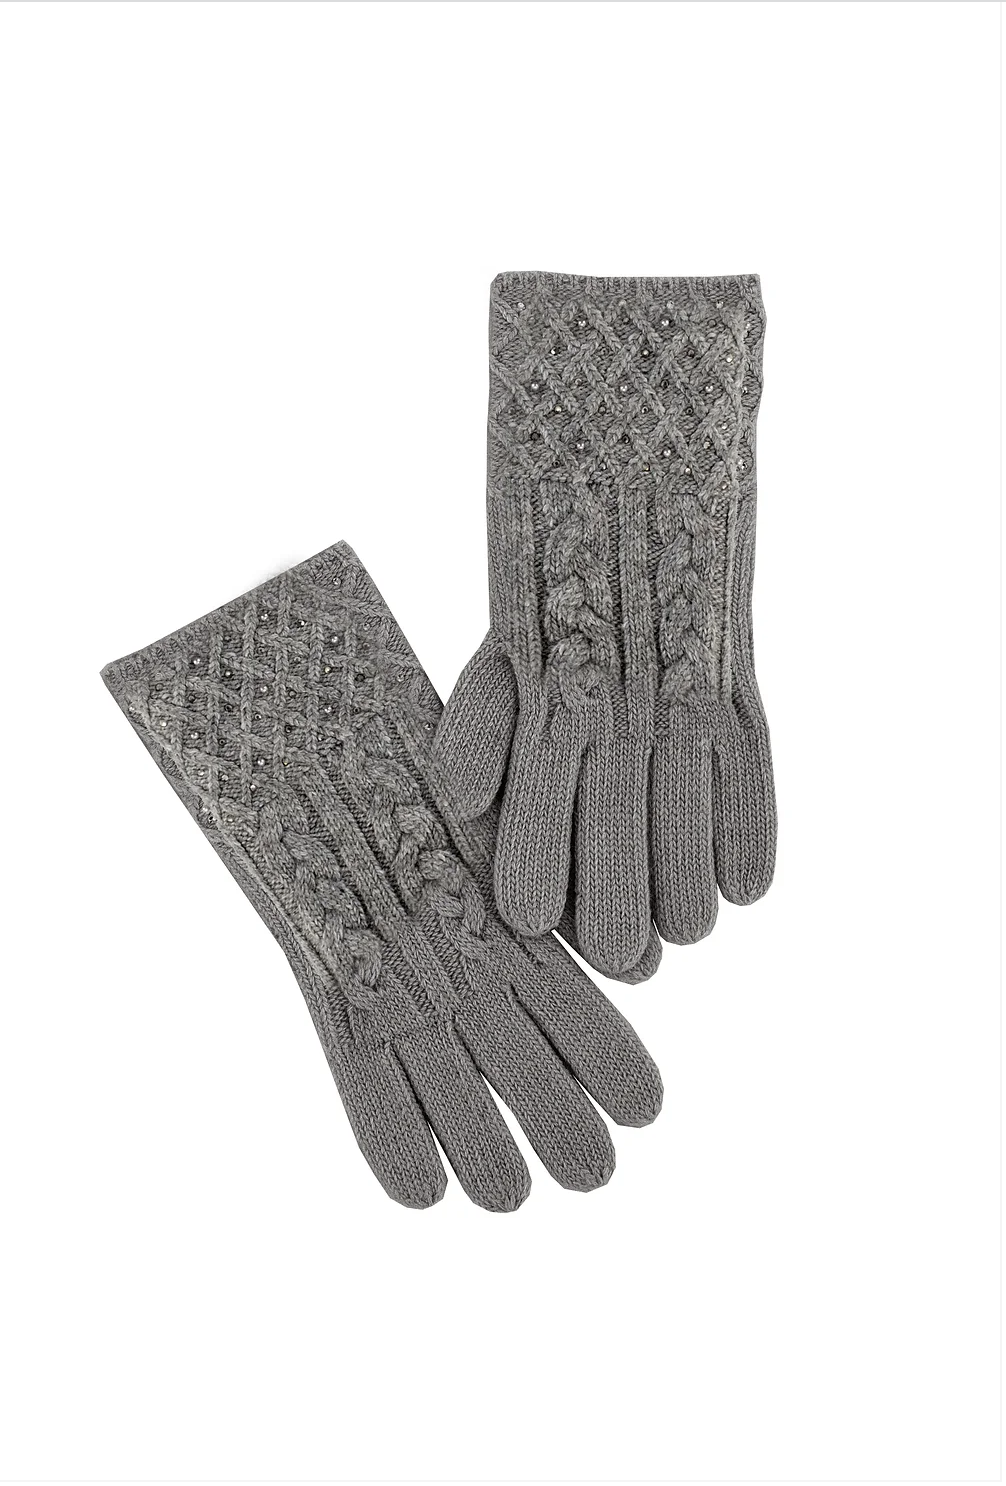 Cable Knit Ladies Glove with Bead Accents -  2 Colors